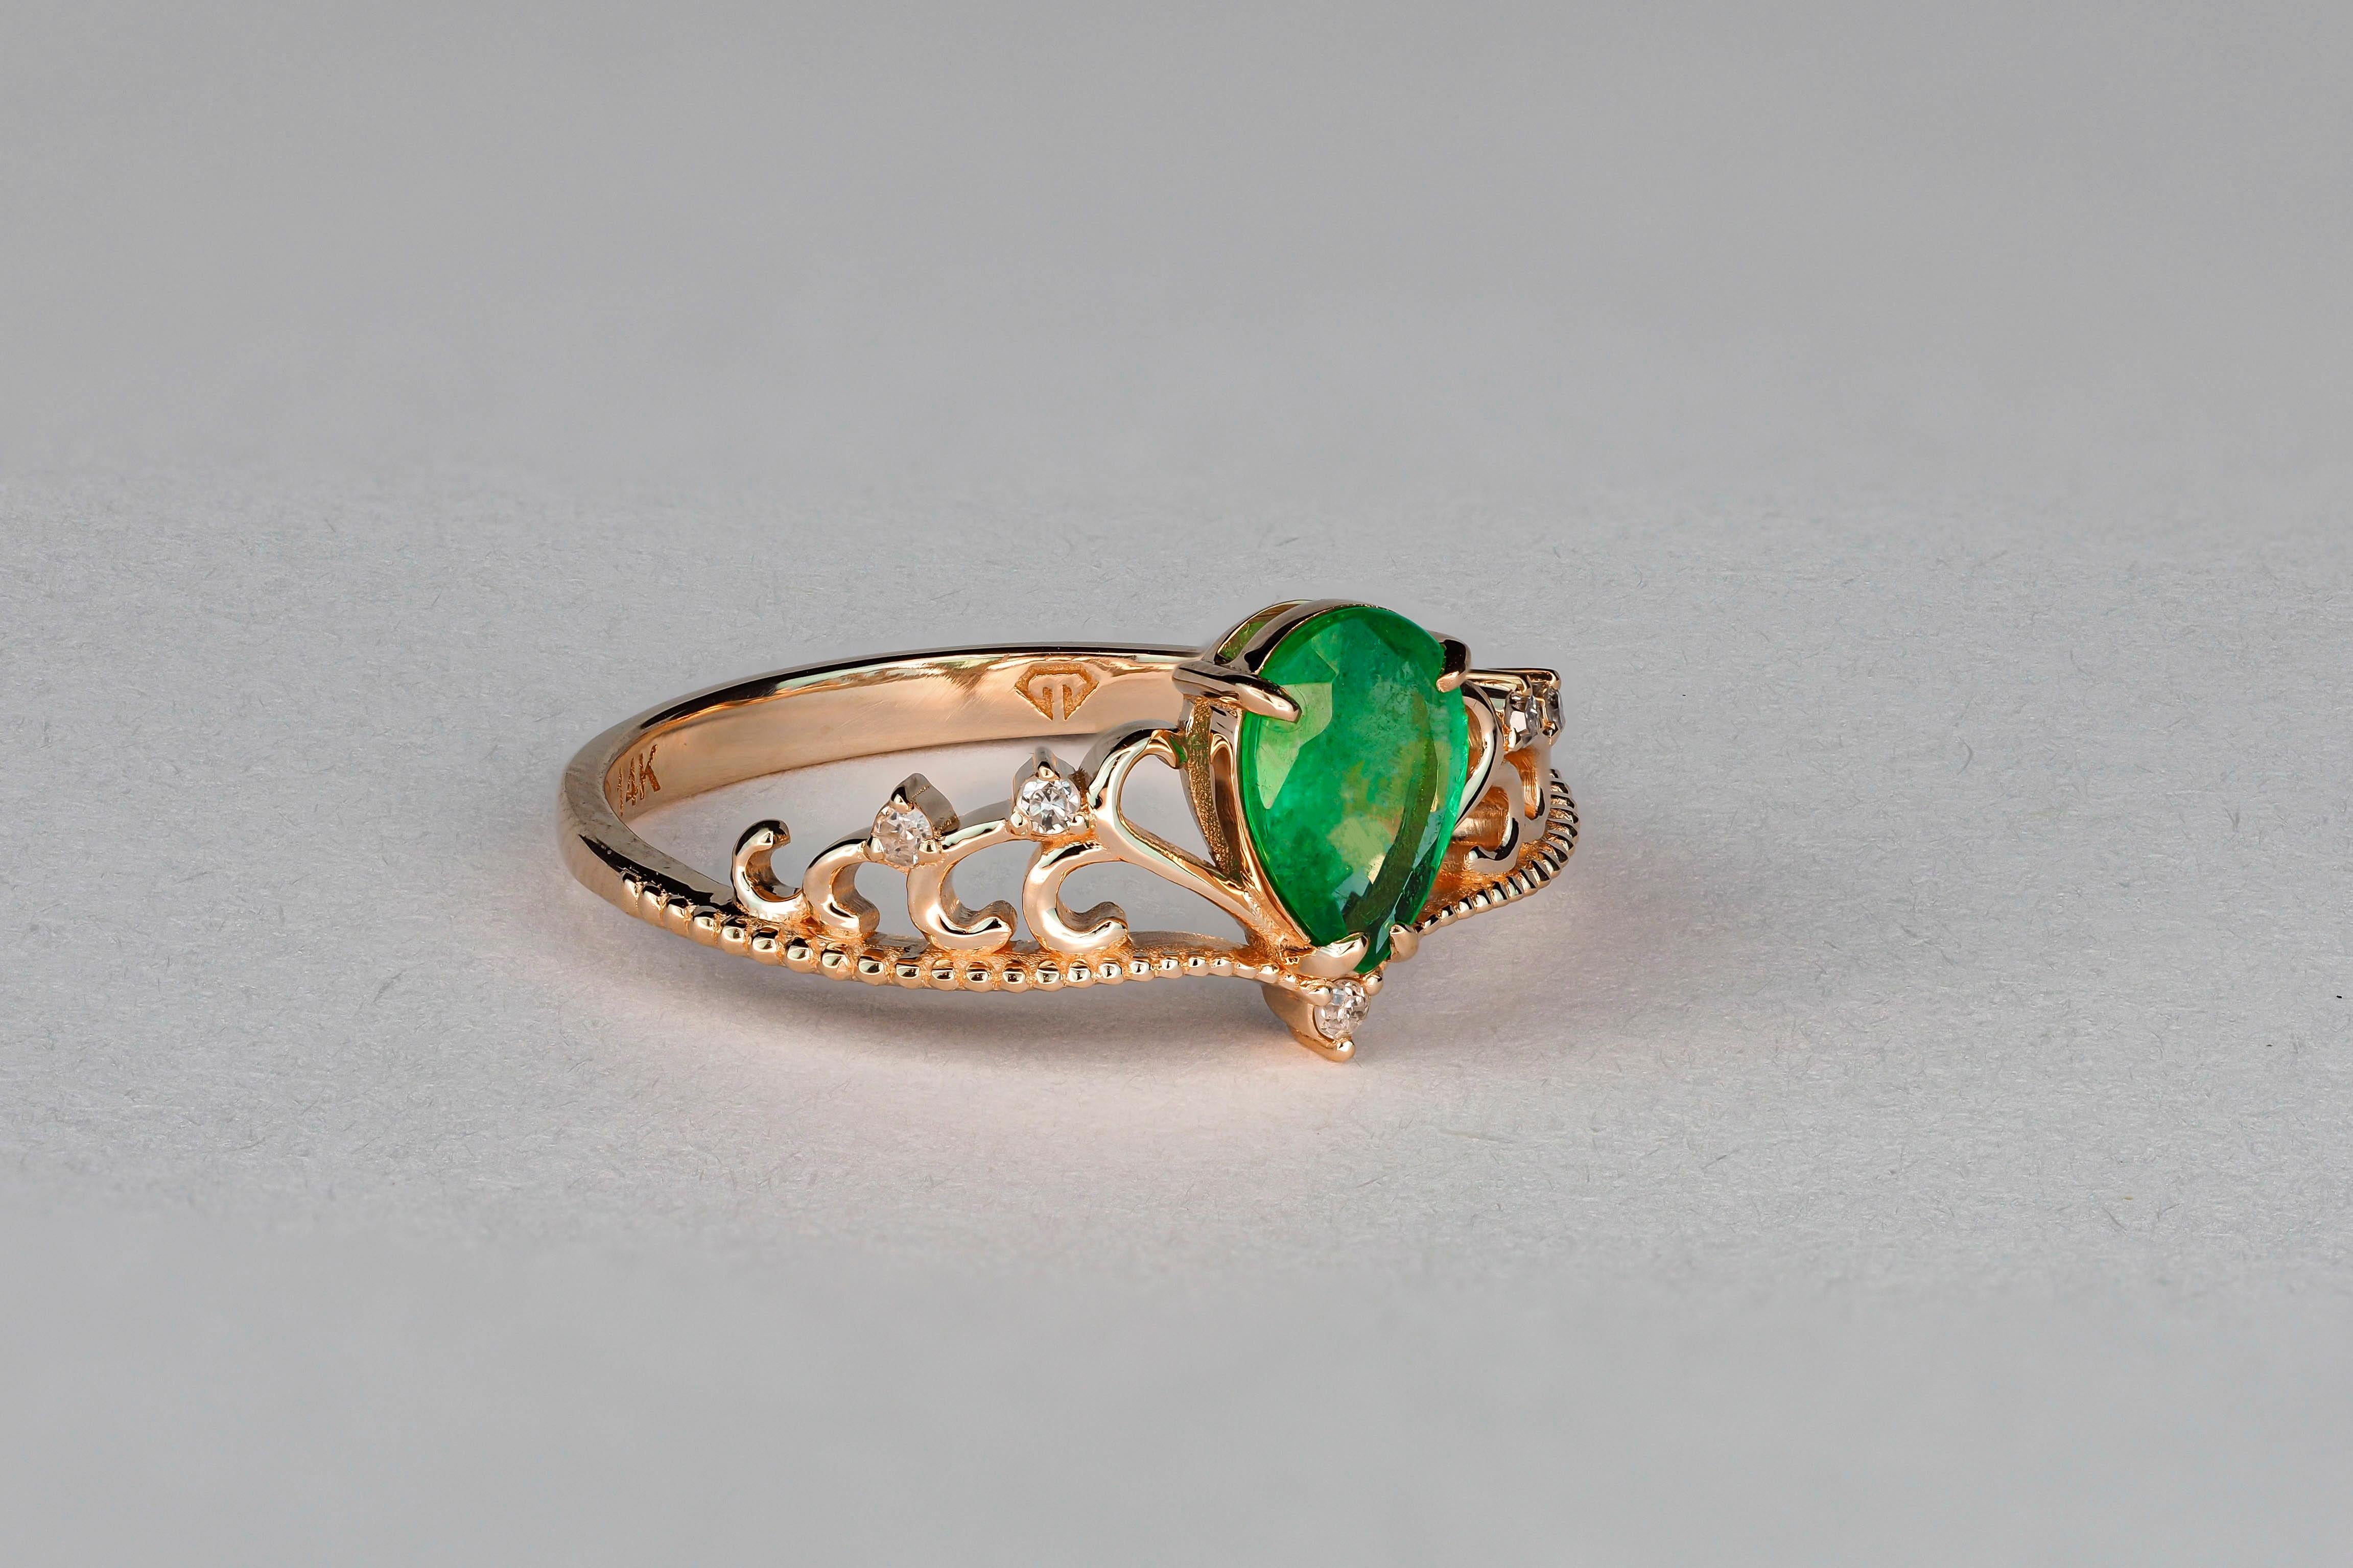 For Sale:  14k Gold Tiara Ring with Natural Emerald and Diamonds! 11